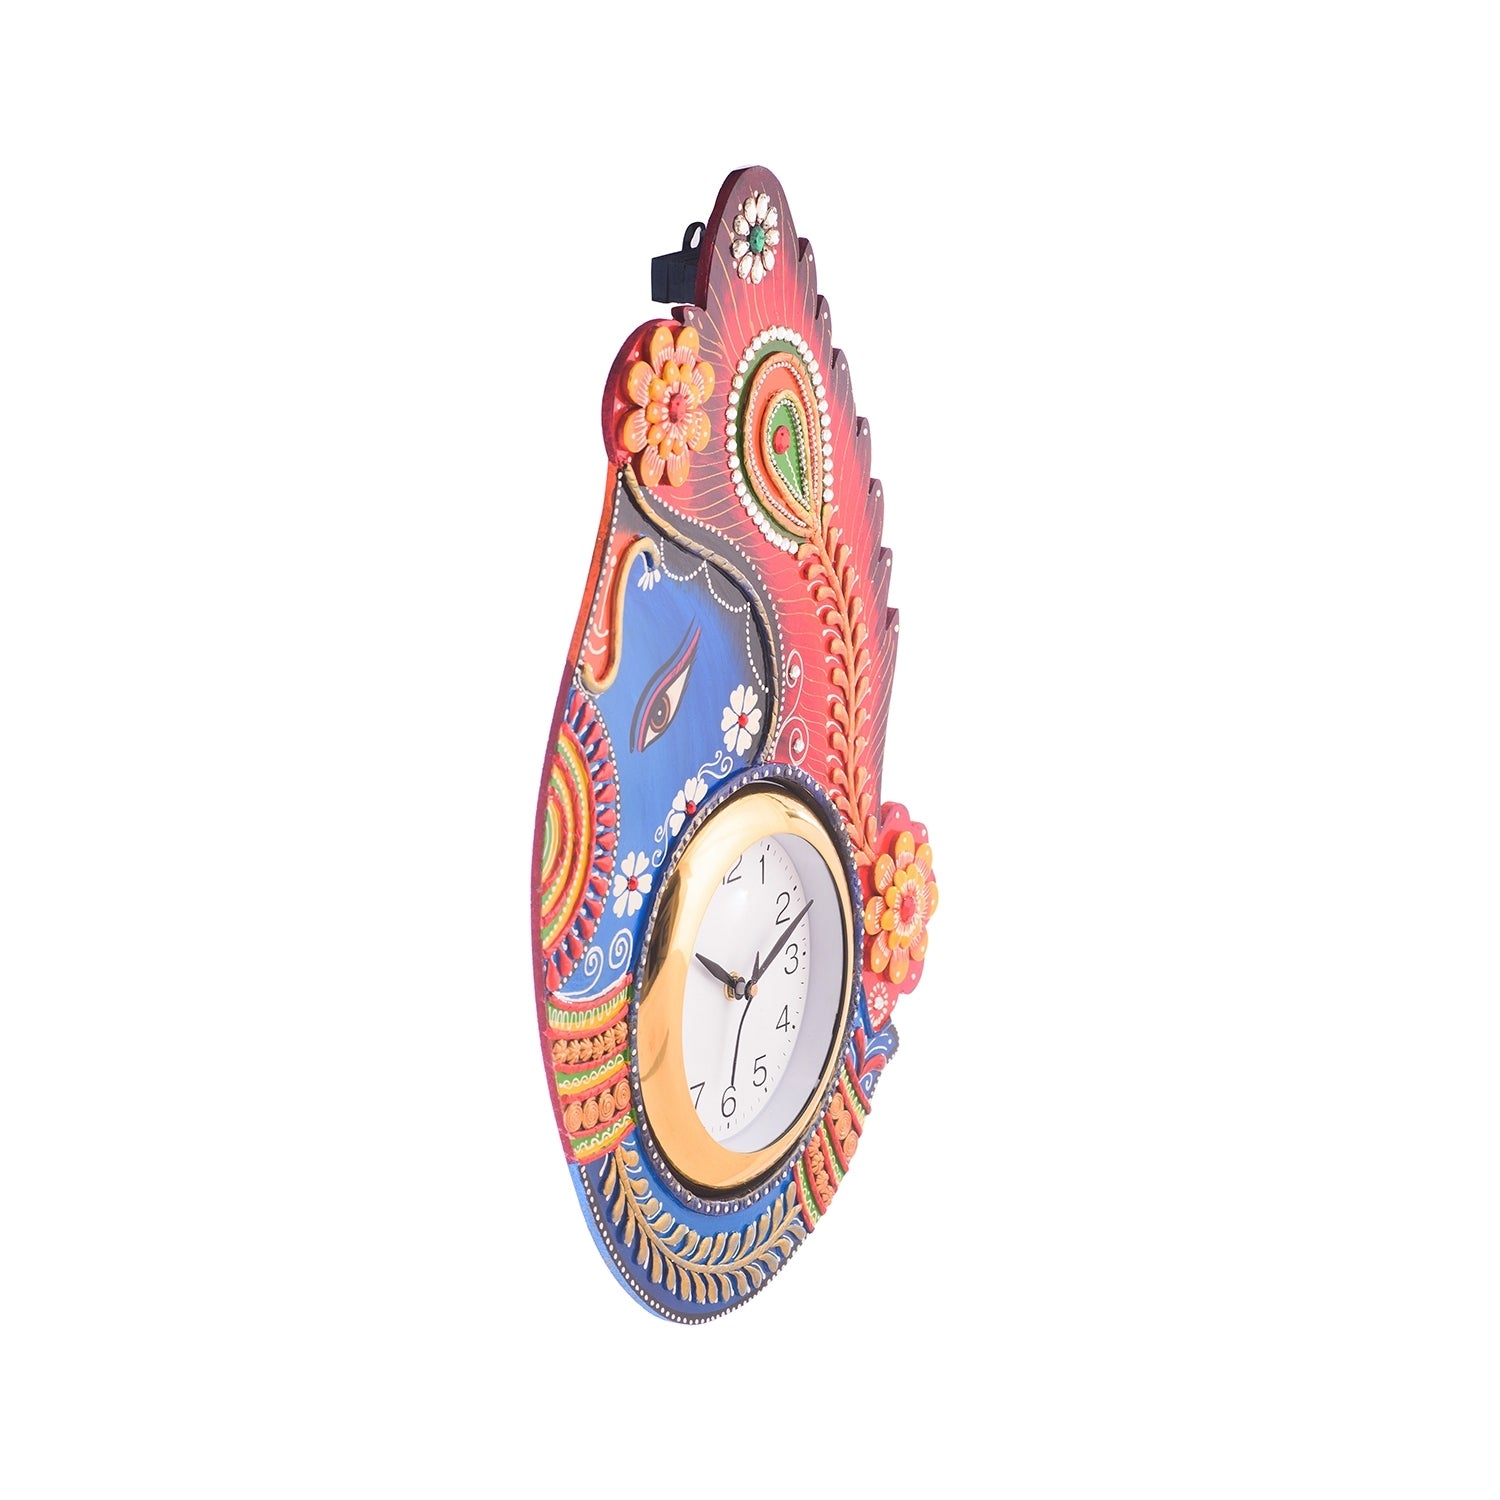 Turban Lord Ganesha Colorful Wooden Handcrafted Wooden Wall Clock (H - 18Inch) 4